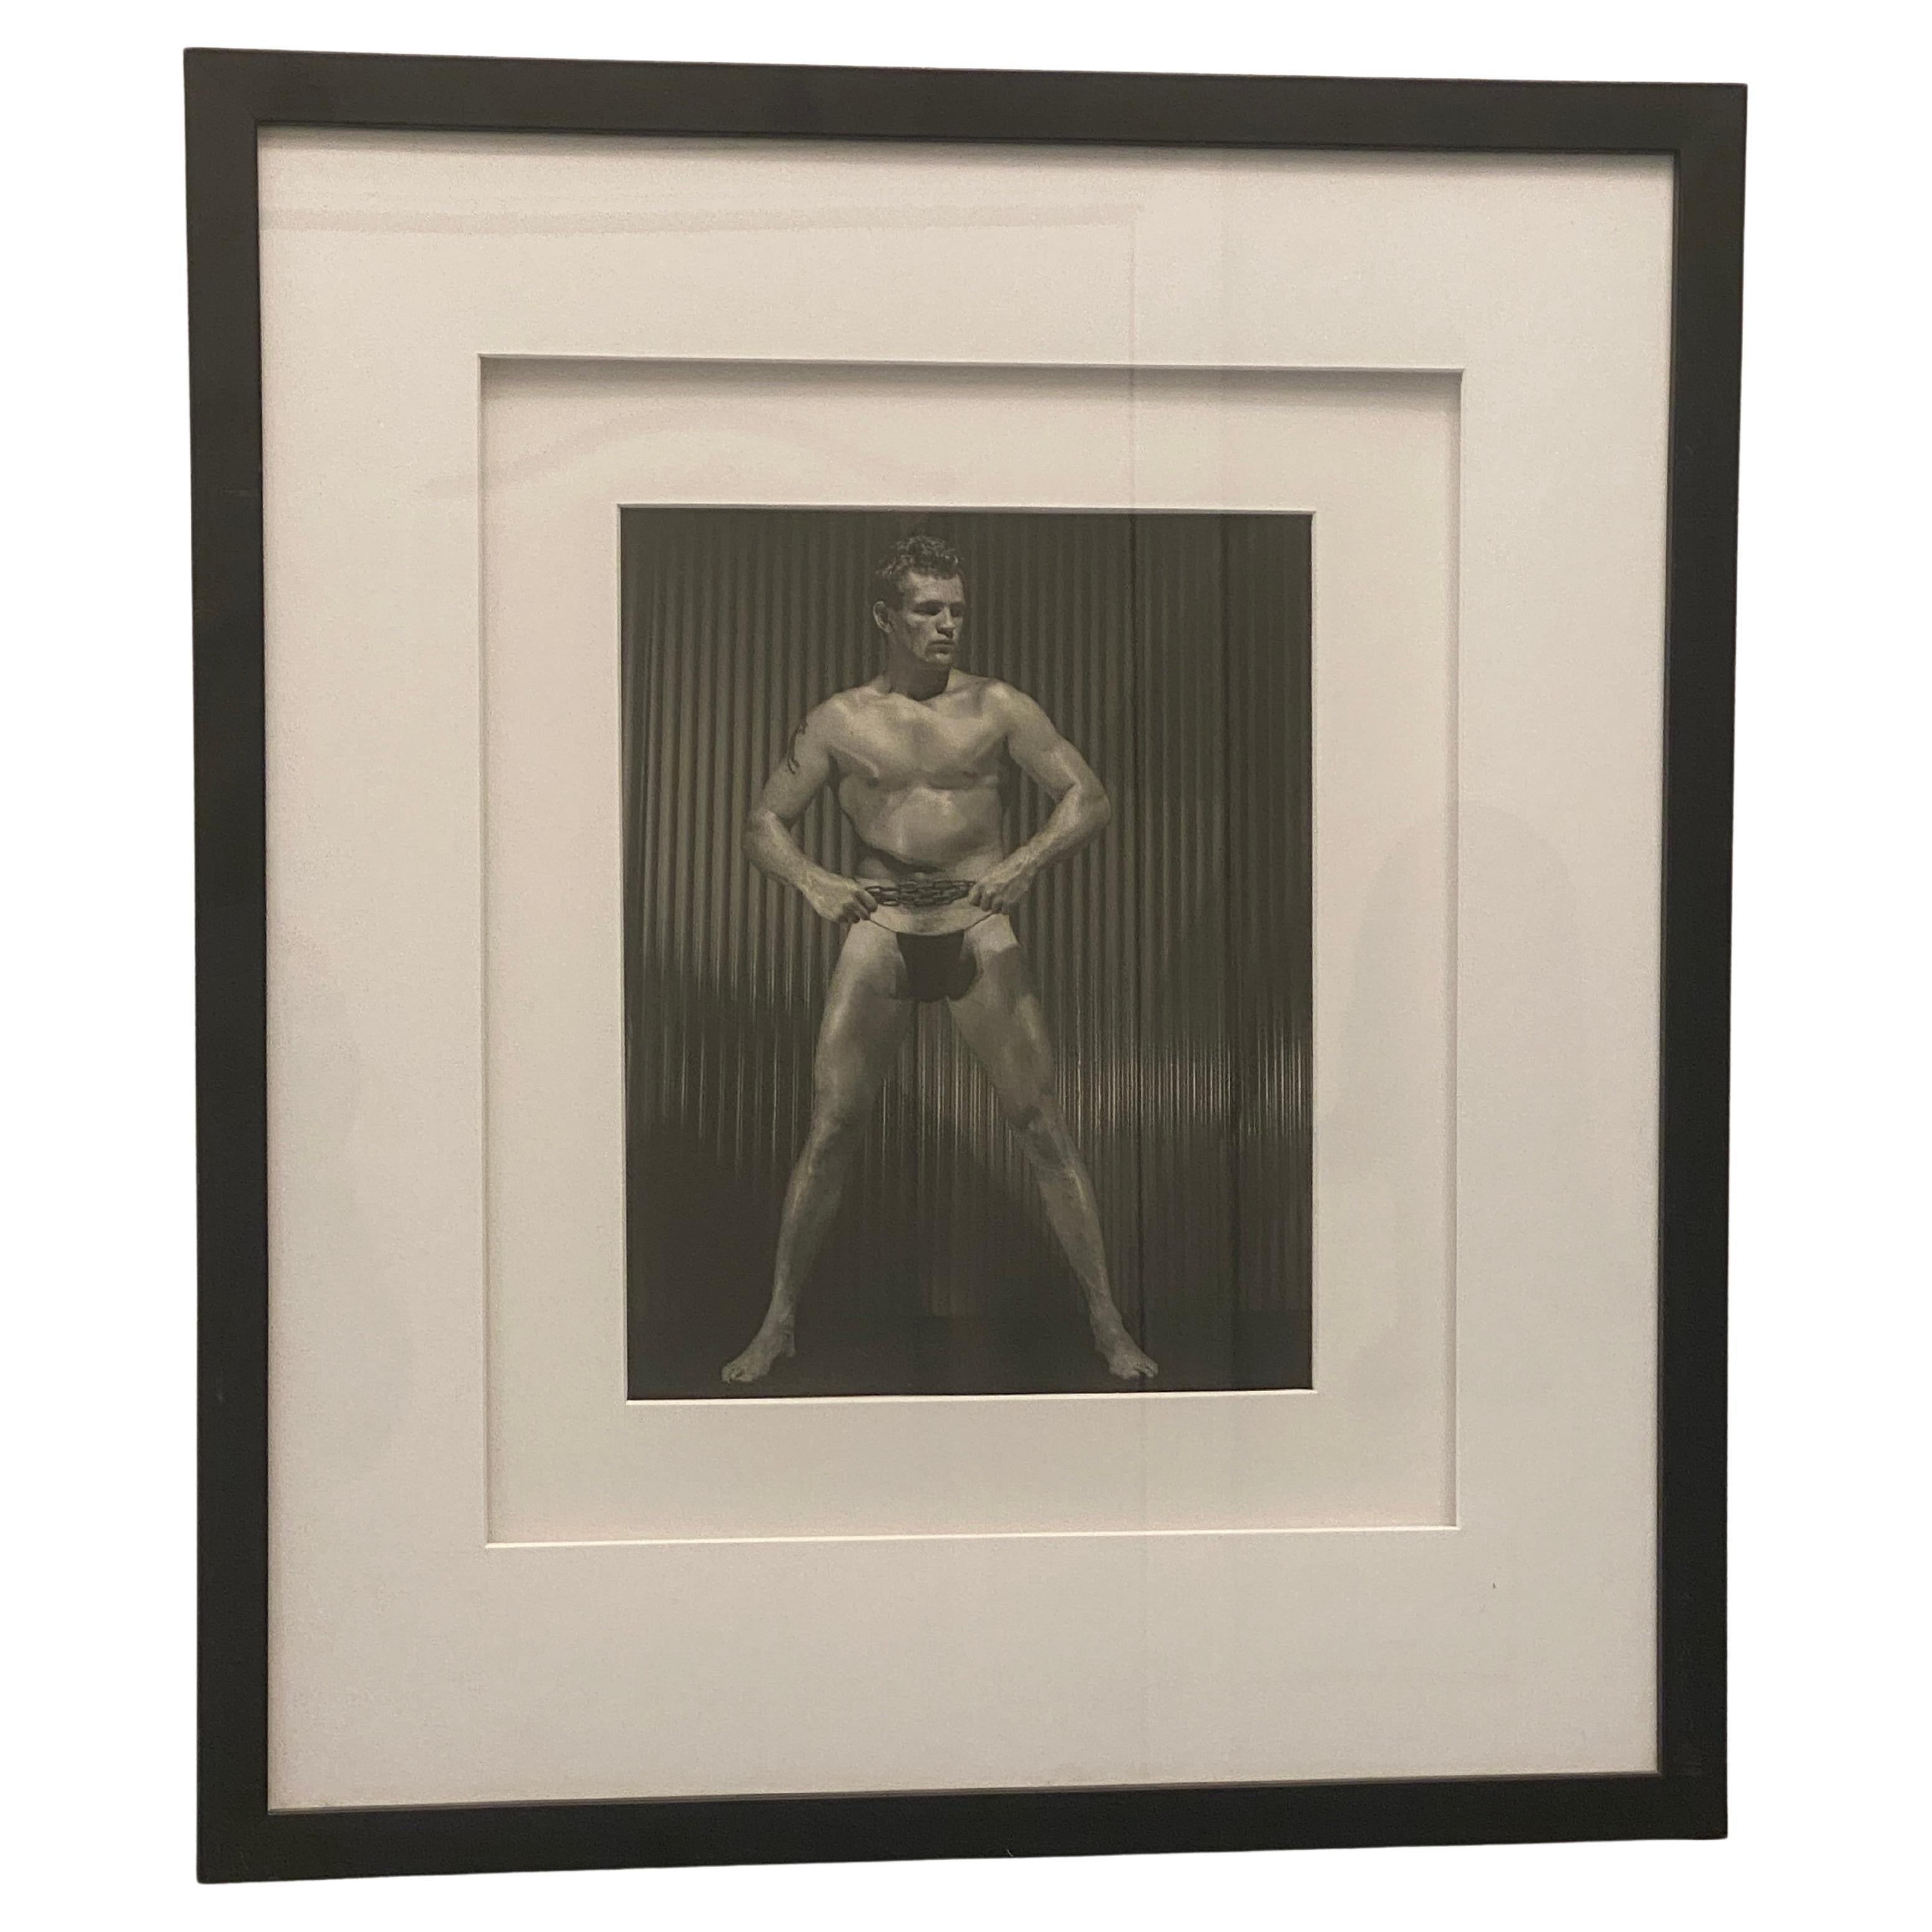 From an important 25 plus year collection of Male Physique and Beefcake photography, iconic image of masculine male model holding metal chain.. Printed in the 1960s and are all signed by the studio on verso when Mr. Bruce Bellas aka Bruce of LA was